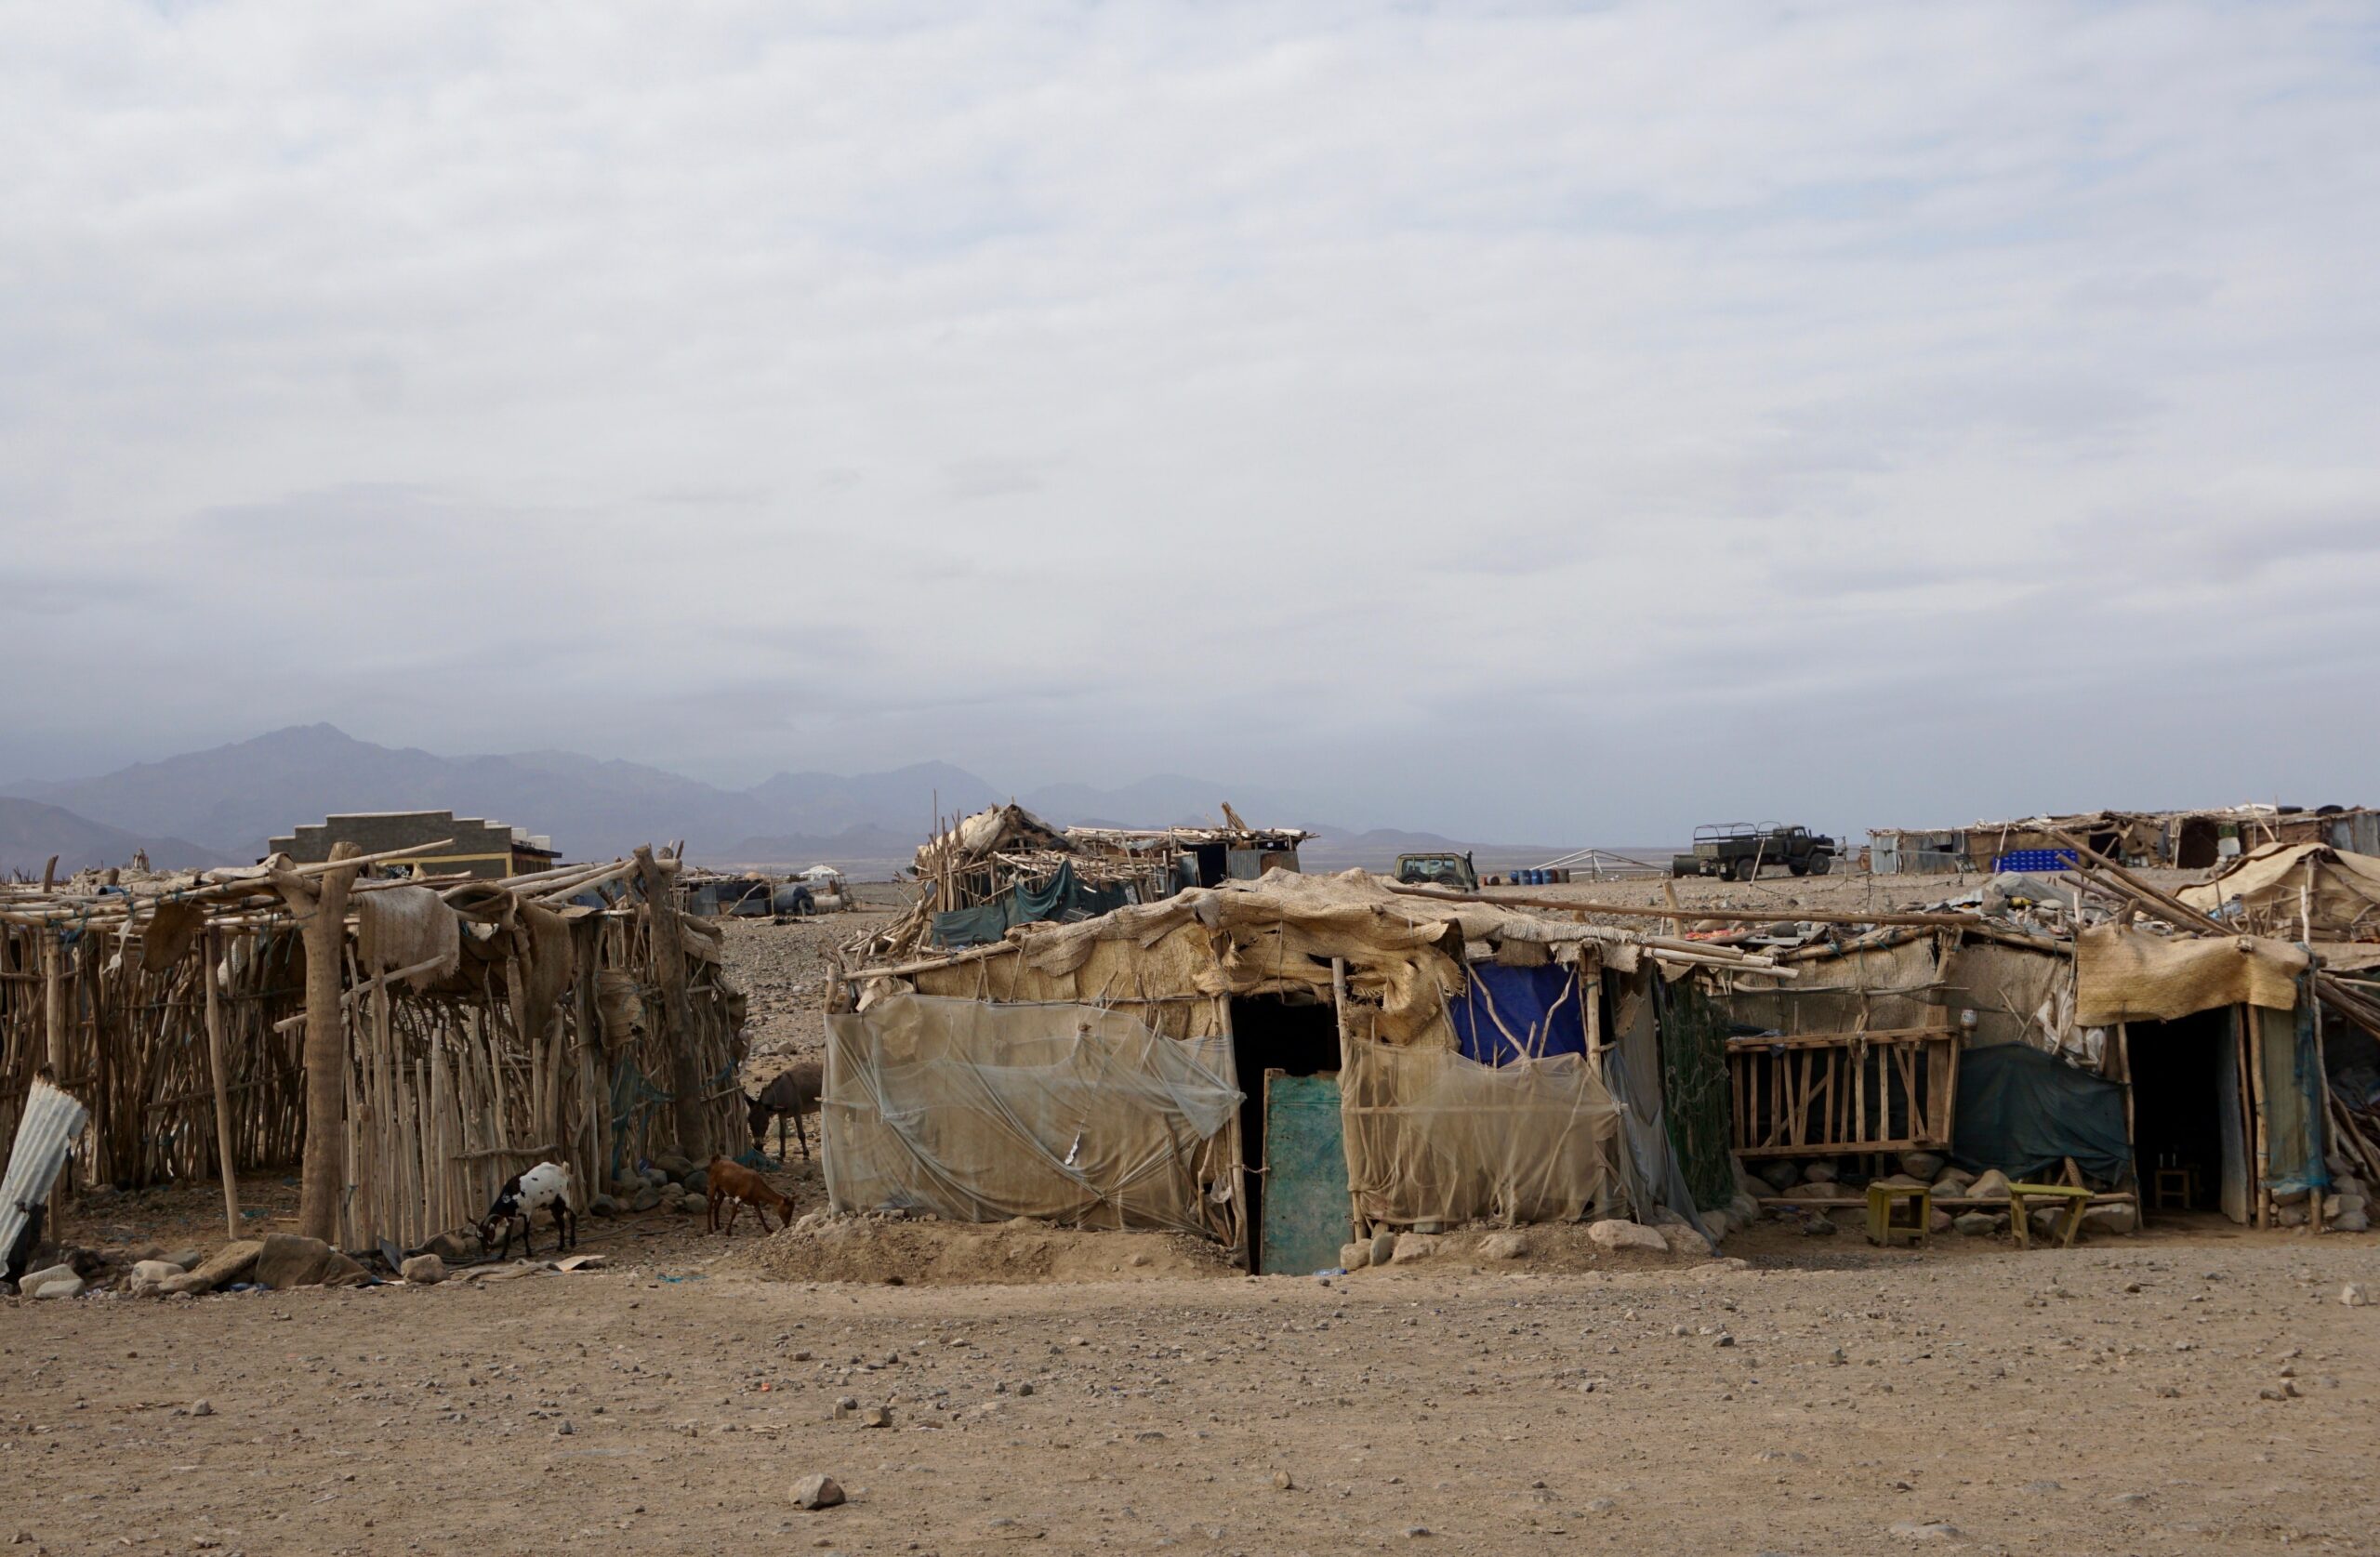 Huts like these ones in Ethiopia's Afar region, provide shelter for many of the region's displaced, amid two years of brutal civil war. Image Credits; Marissa Bortlik, Source: Unsplash